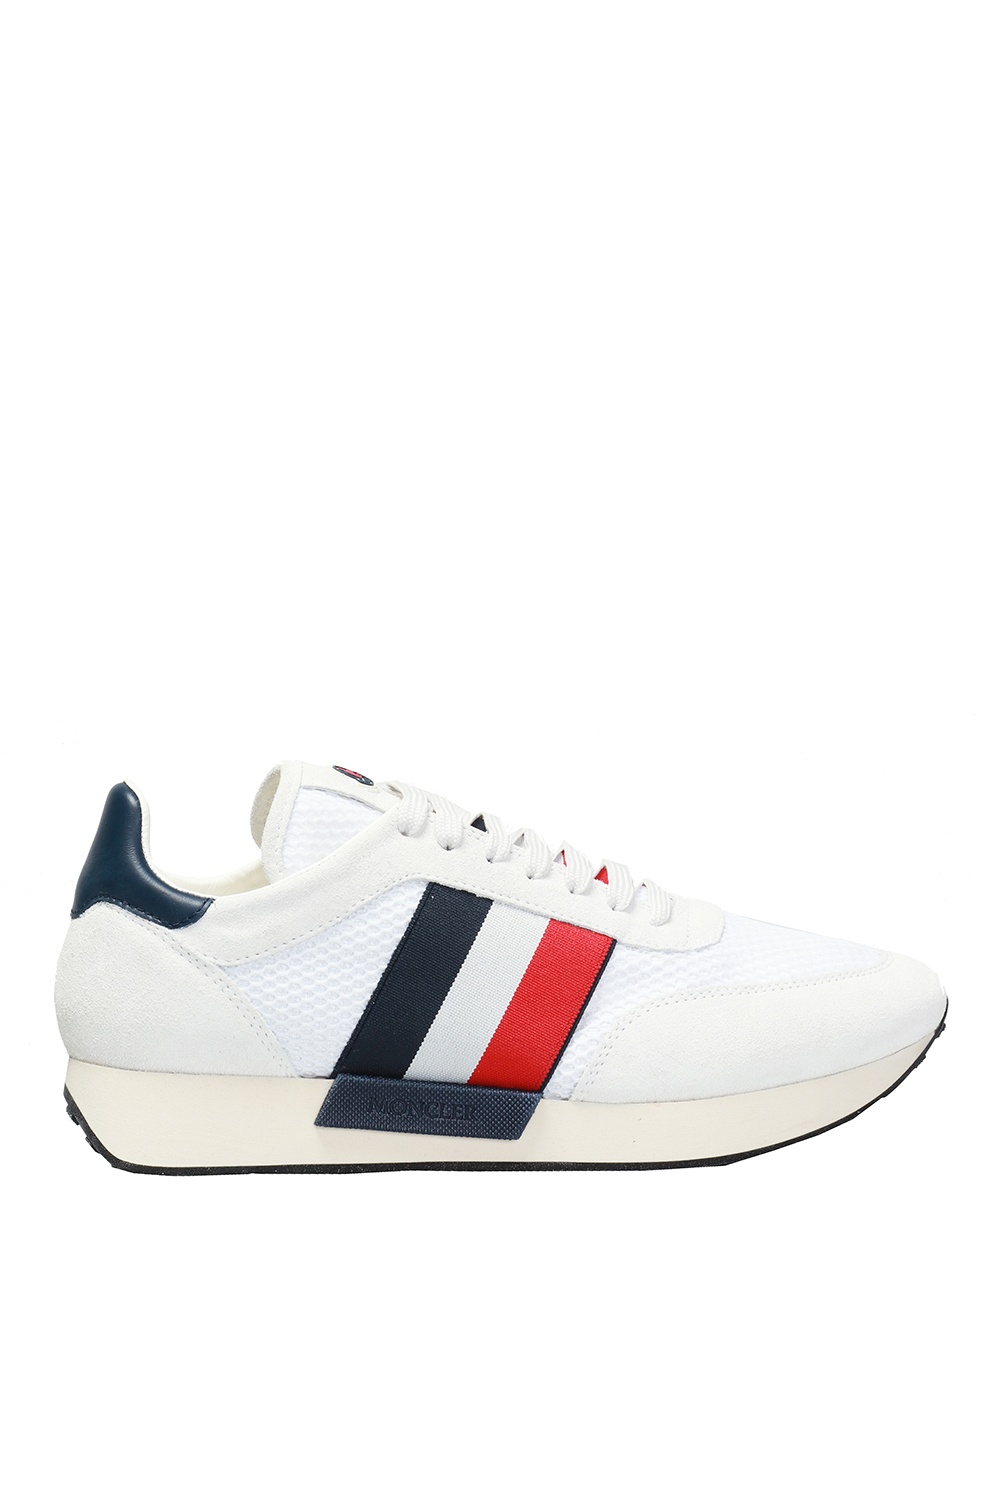 moncler horace sneakers